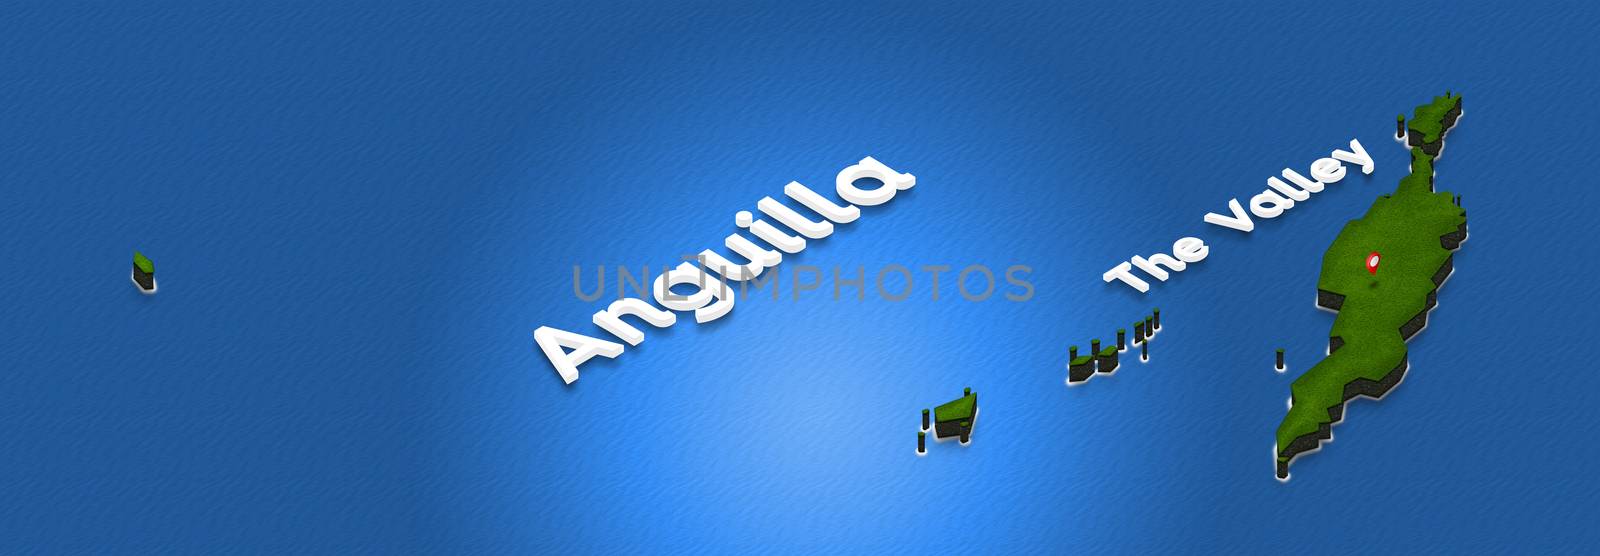 Map of Anguilla. 3D isometric perspective illustration. by sanches812